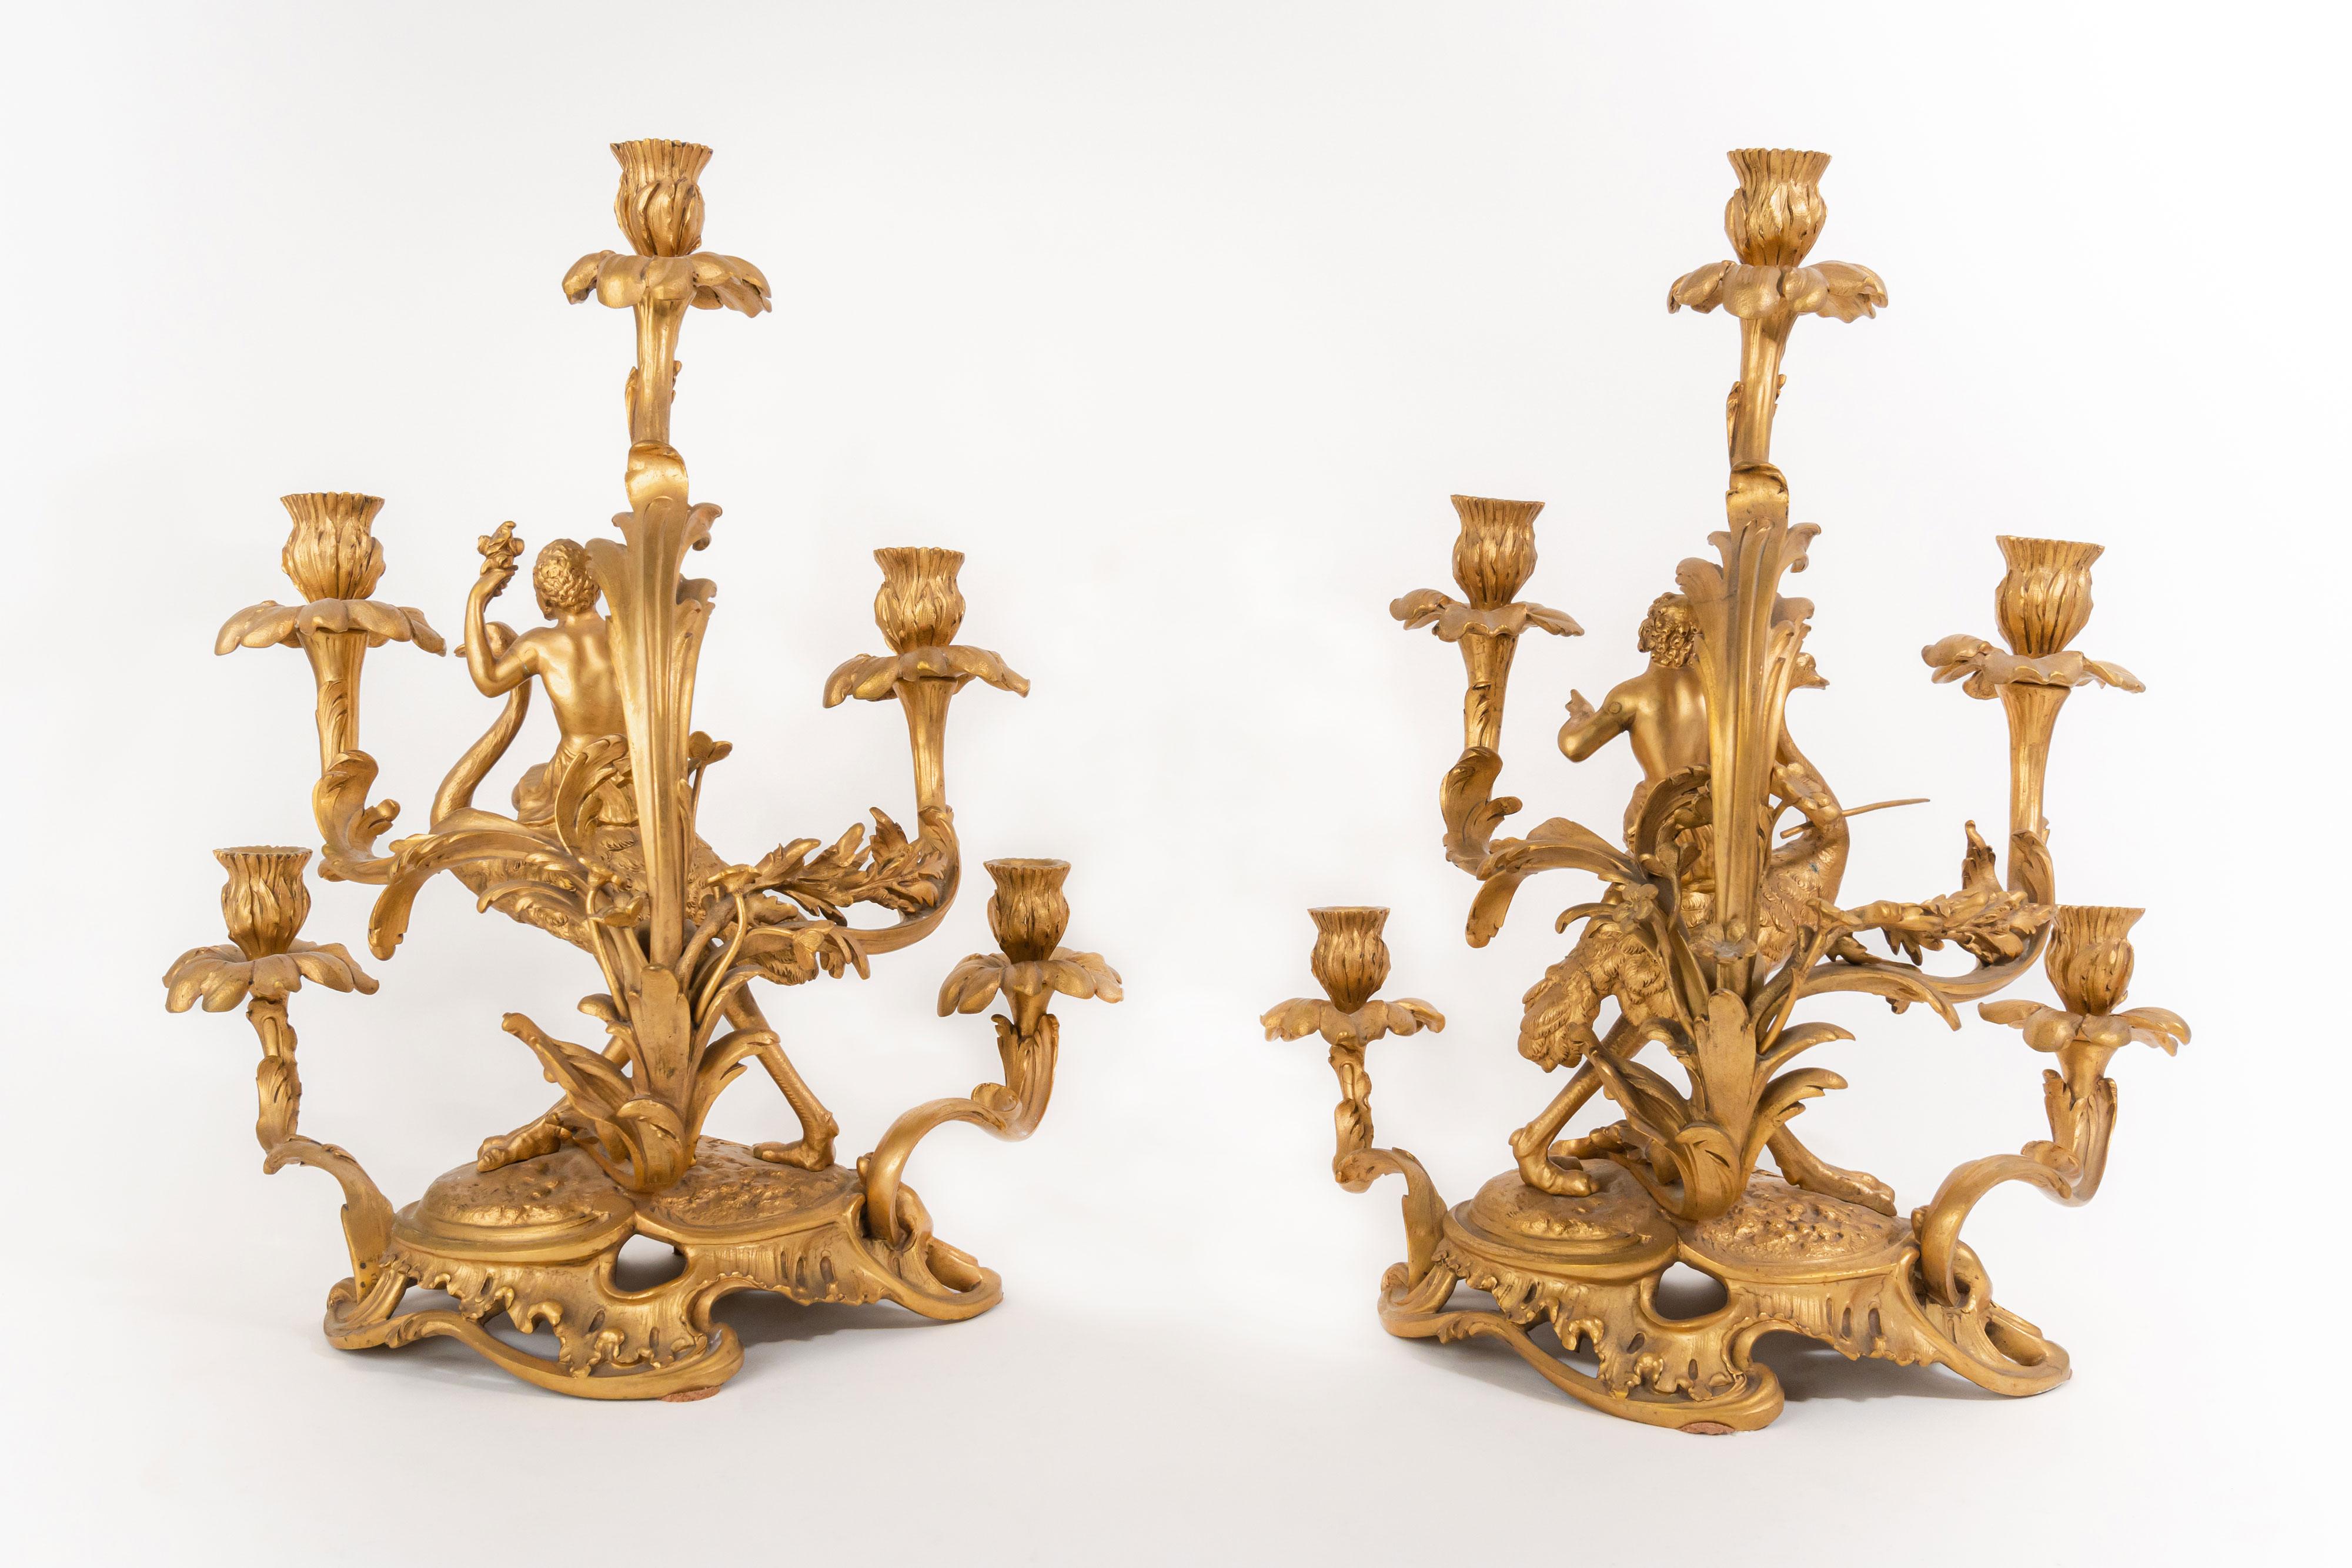 Pair Of 19th Century French Gilt Bronze Candelabras, France, Circa 1880 For Sale 6